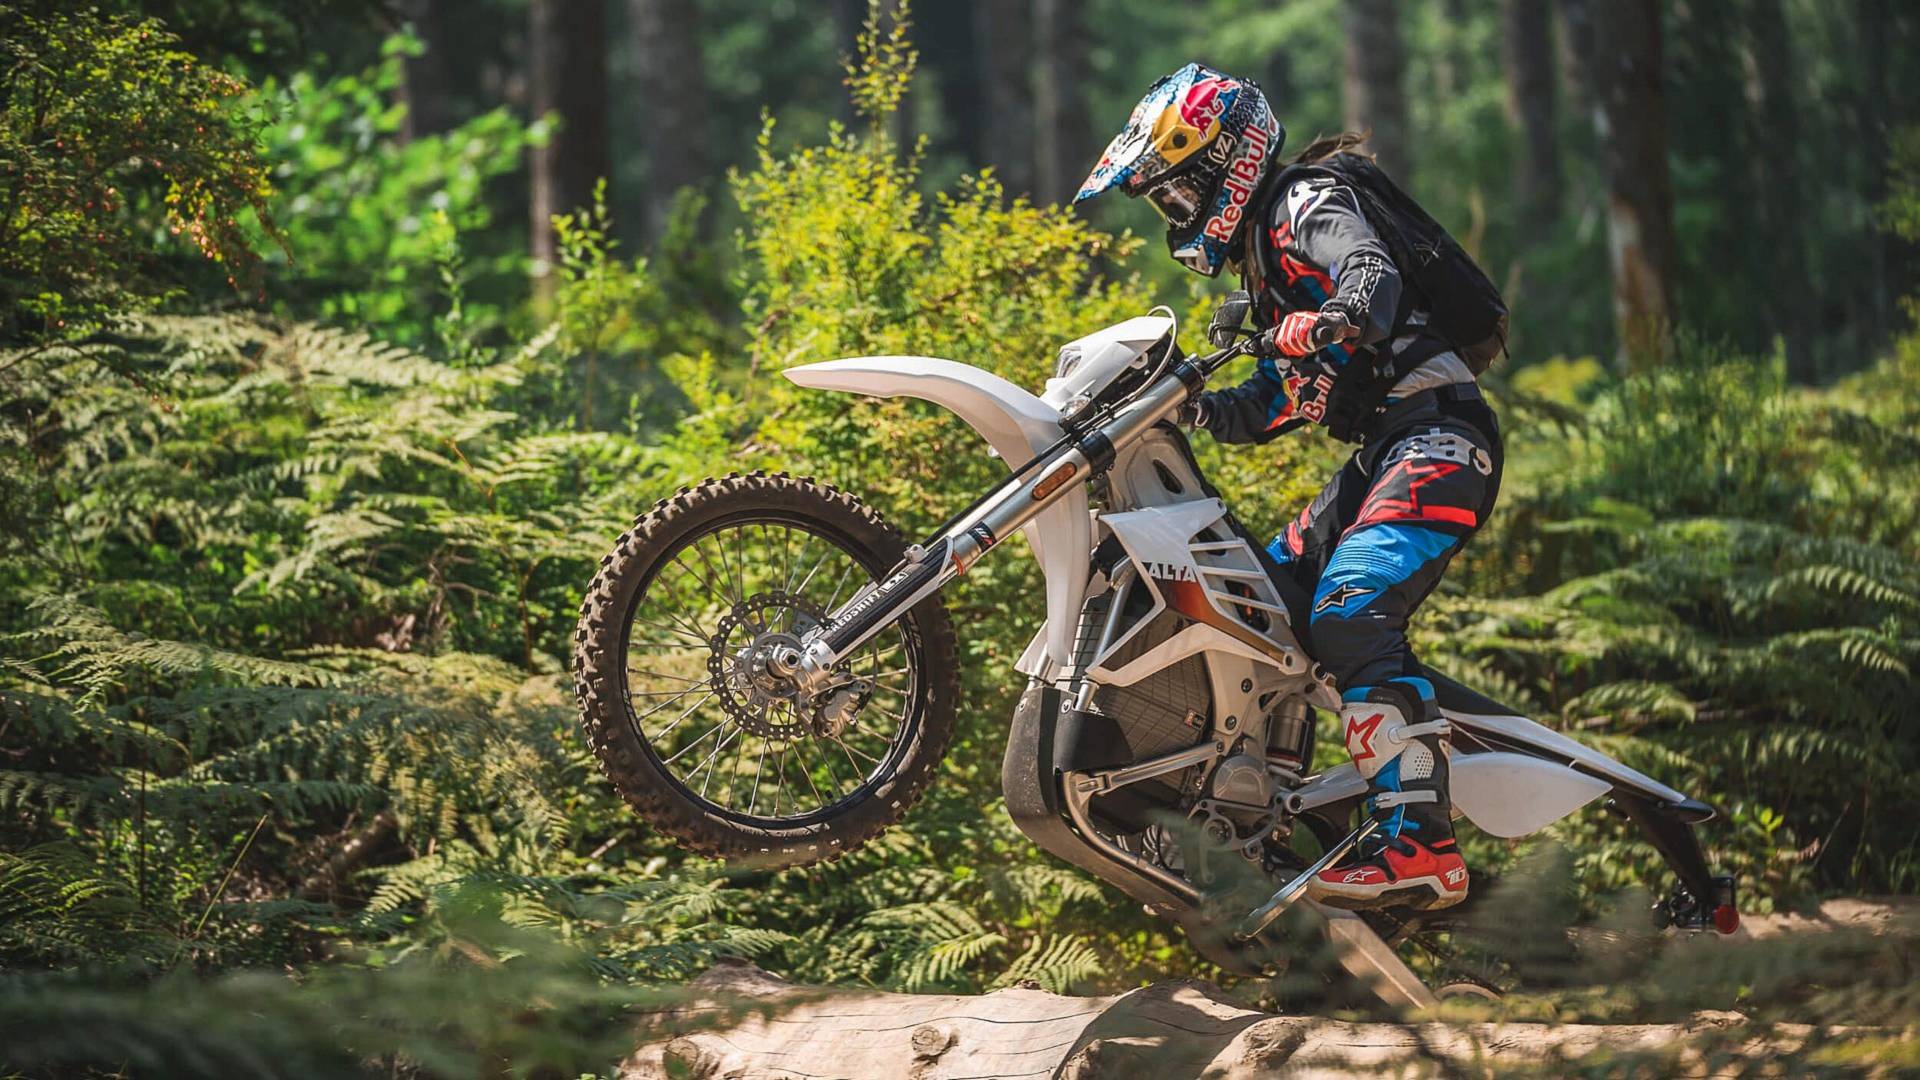 Alta Recalls Redshift Exr And Mxr For Software Issues Rideapart